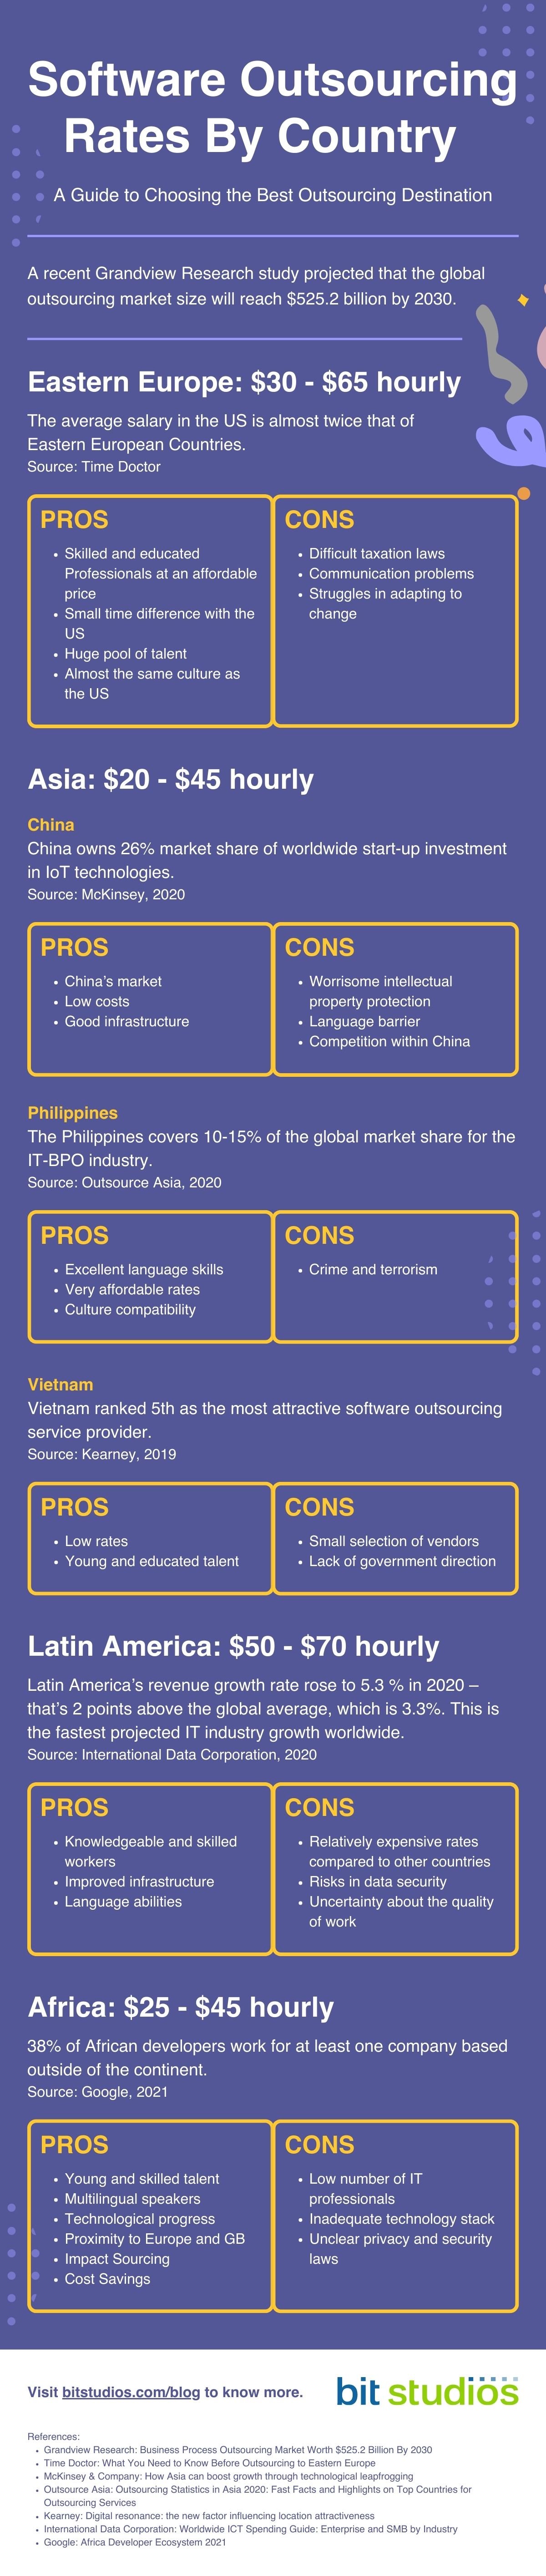 Software Outsourcing Rates in 2022 Infographics